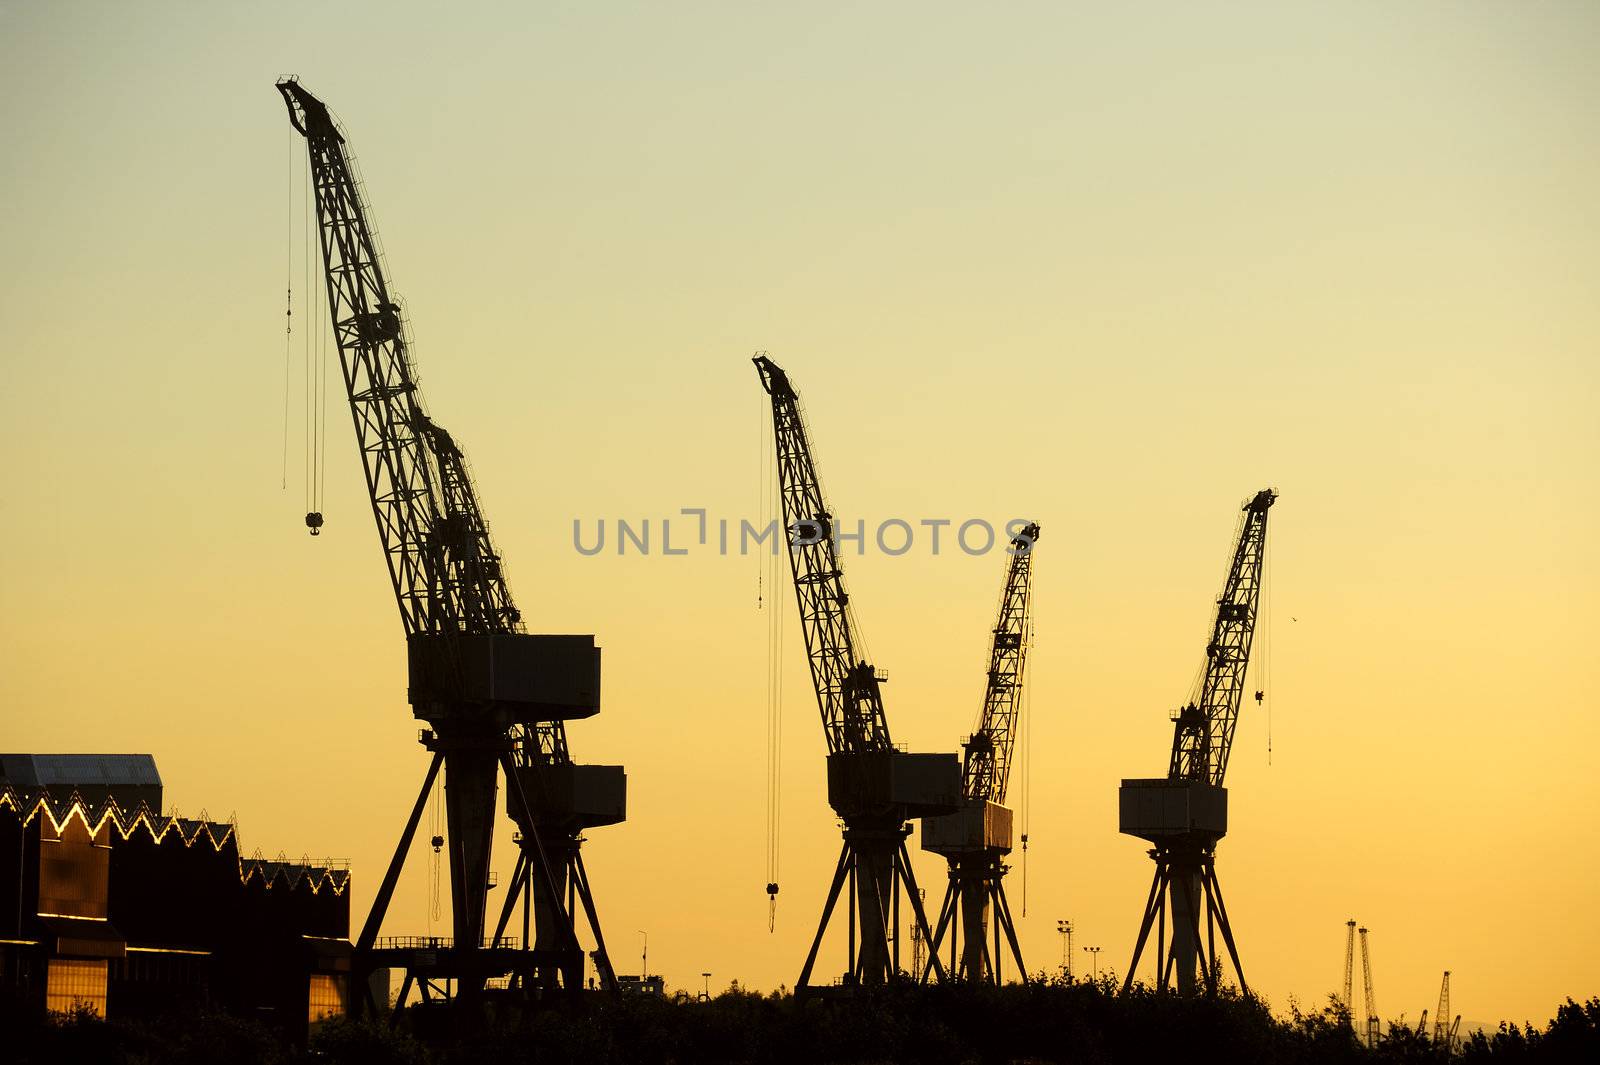 Cranes silhouetted by Bateleur